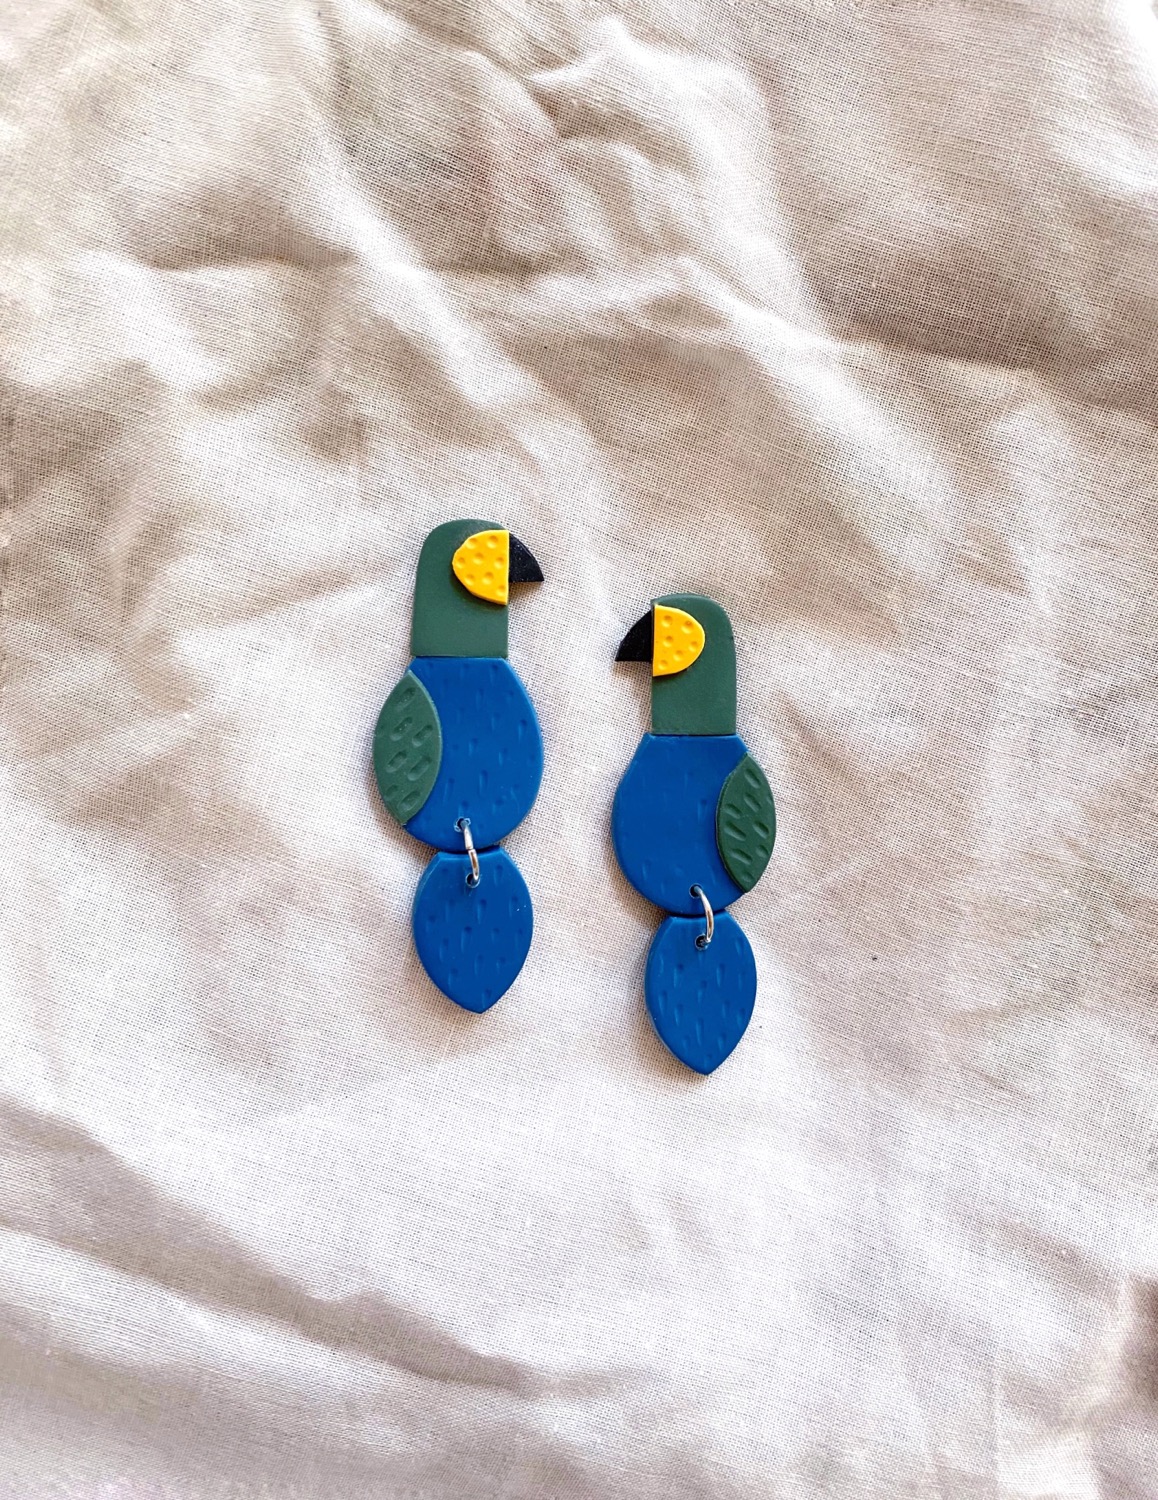 Polymer Clay Earrings | Limited Preorder: Parrot Earrings